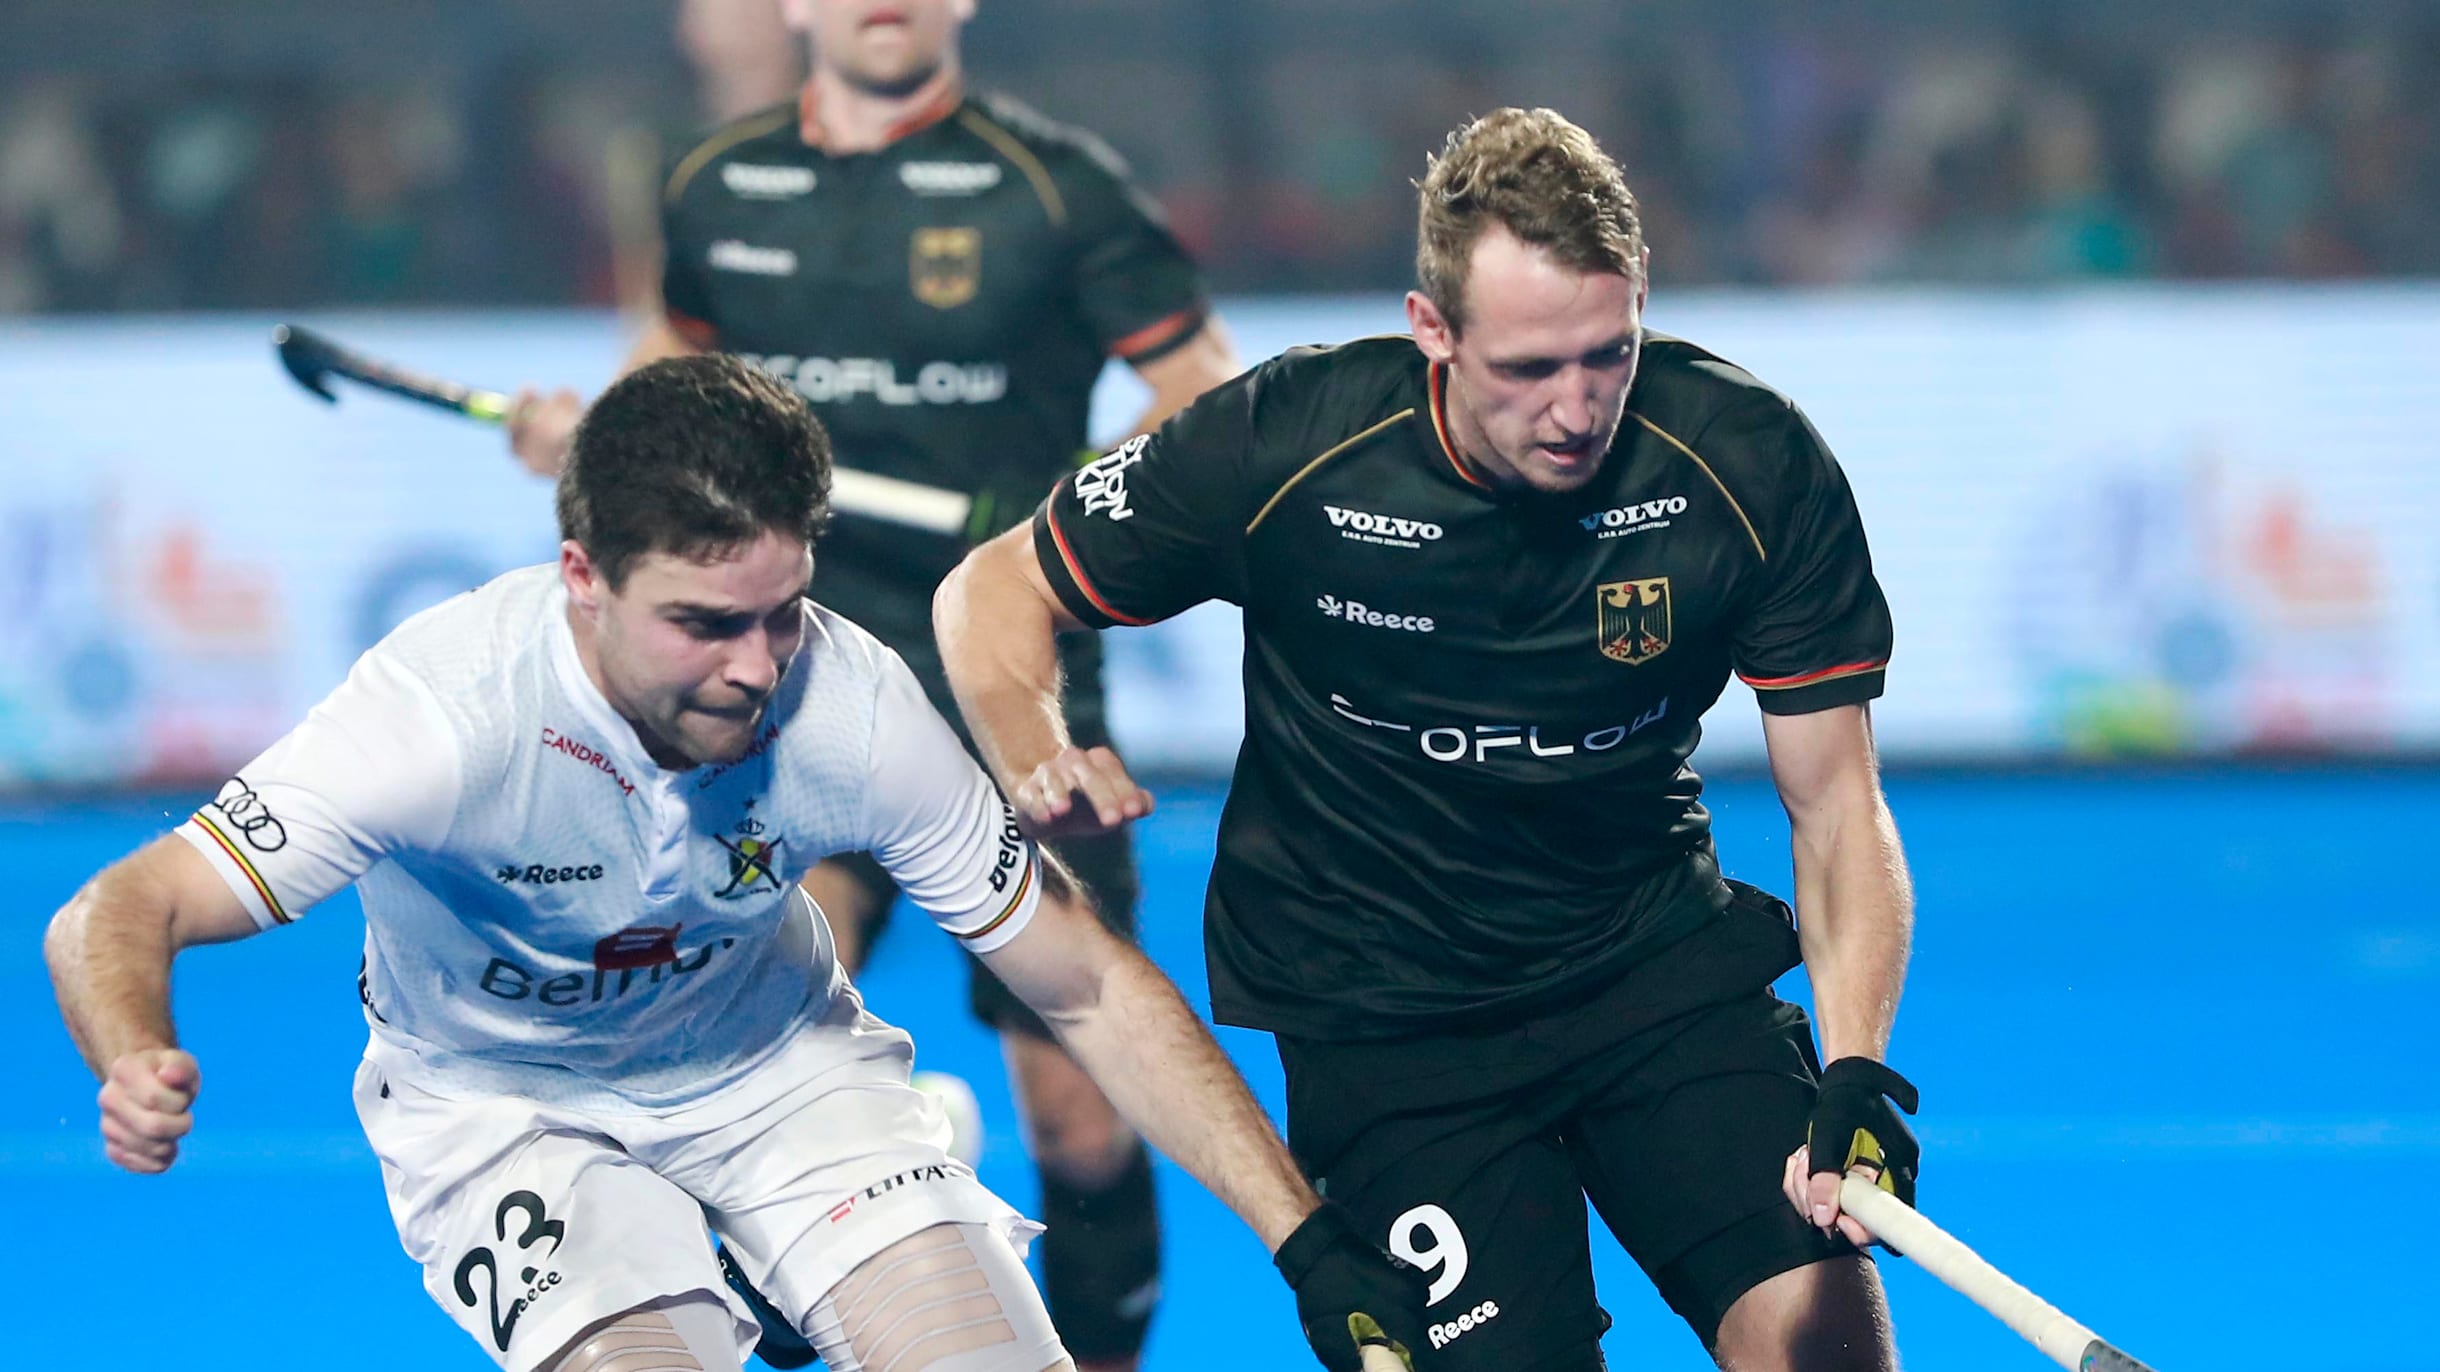 Germany vs Belgium, hockey World Cup 2023 final Watch live streaming and telecast in India and get match time